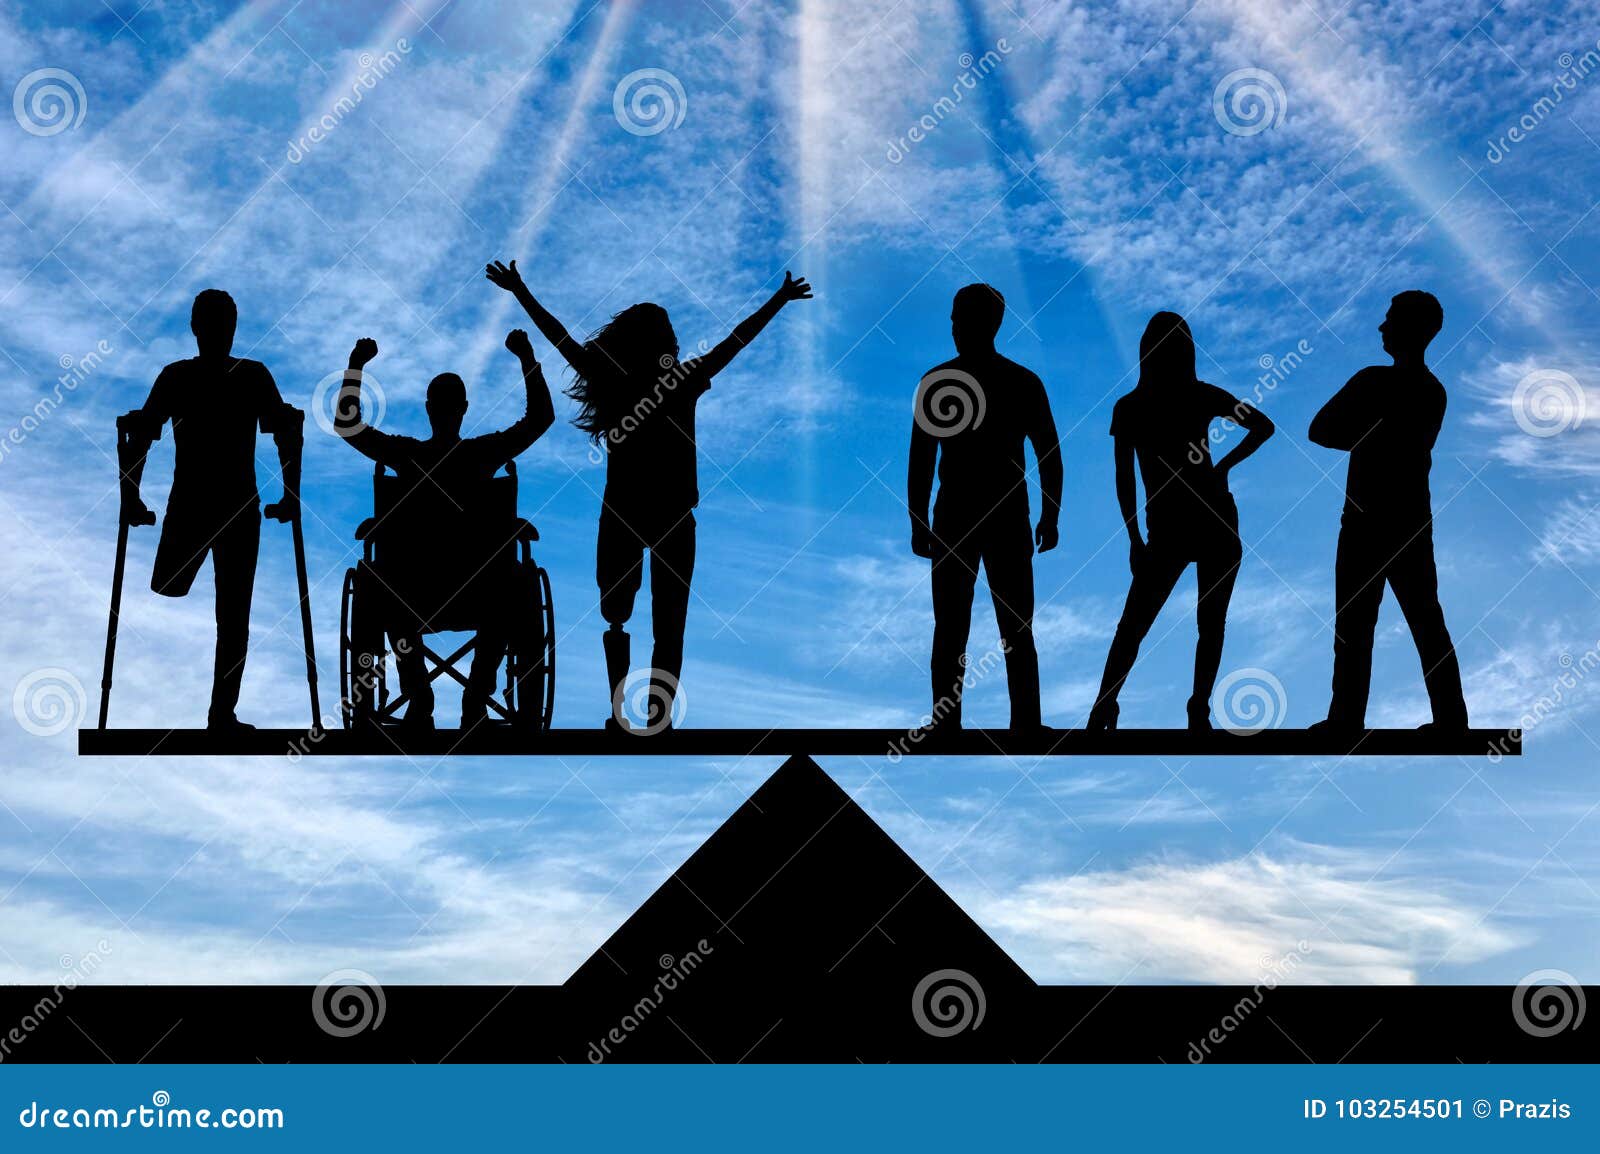 concept of social b legal equality of persons with disabilities in society